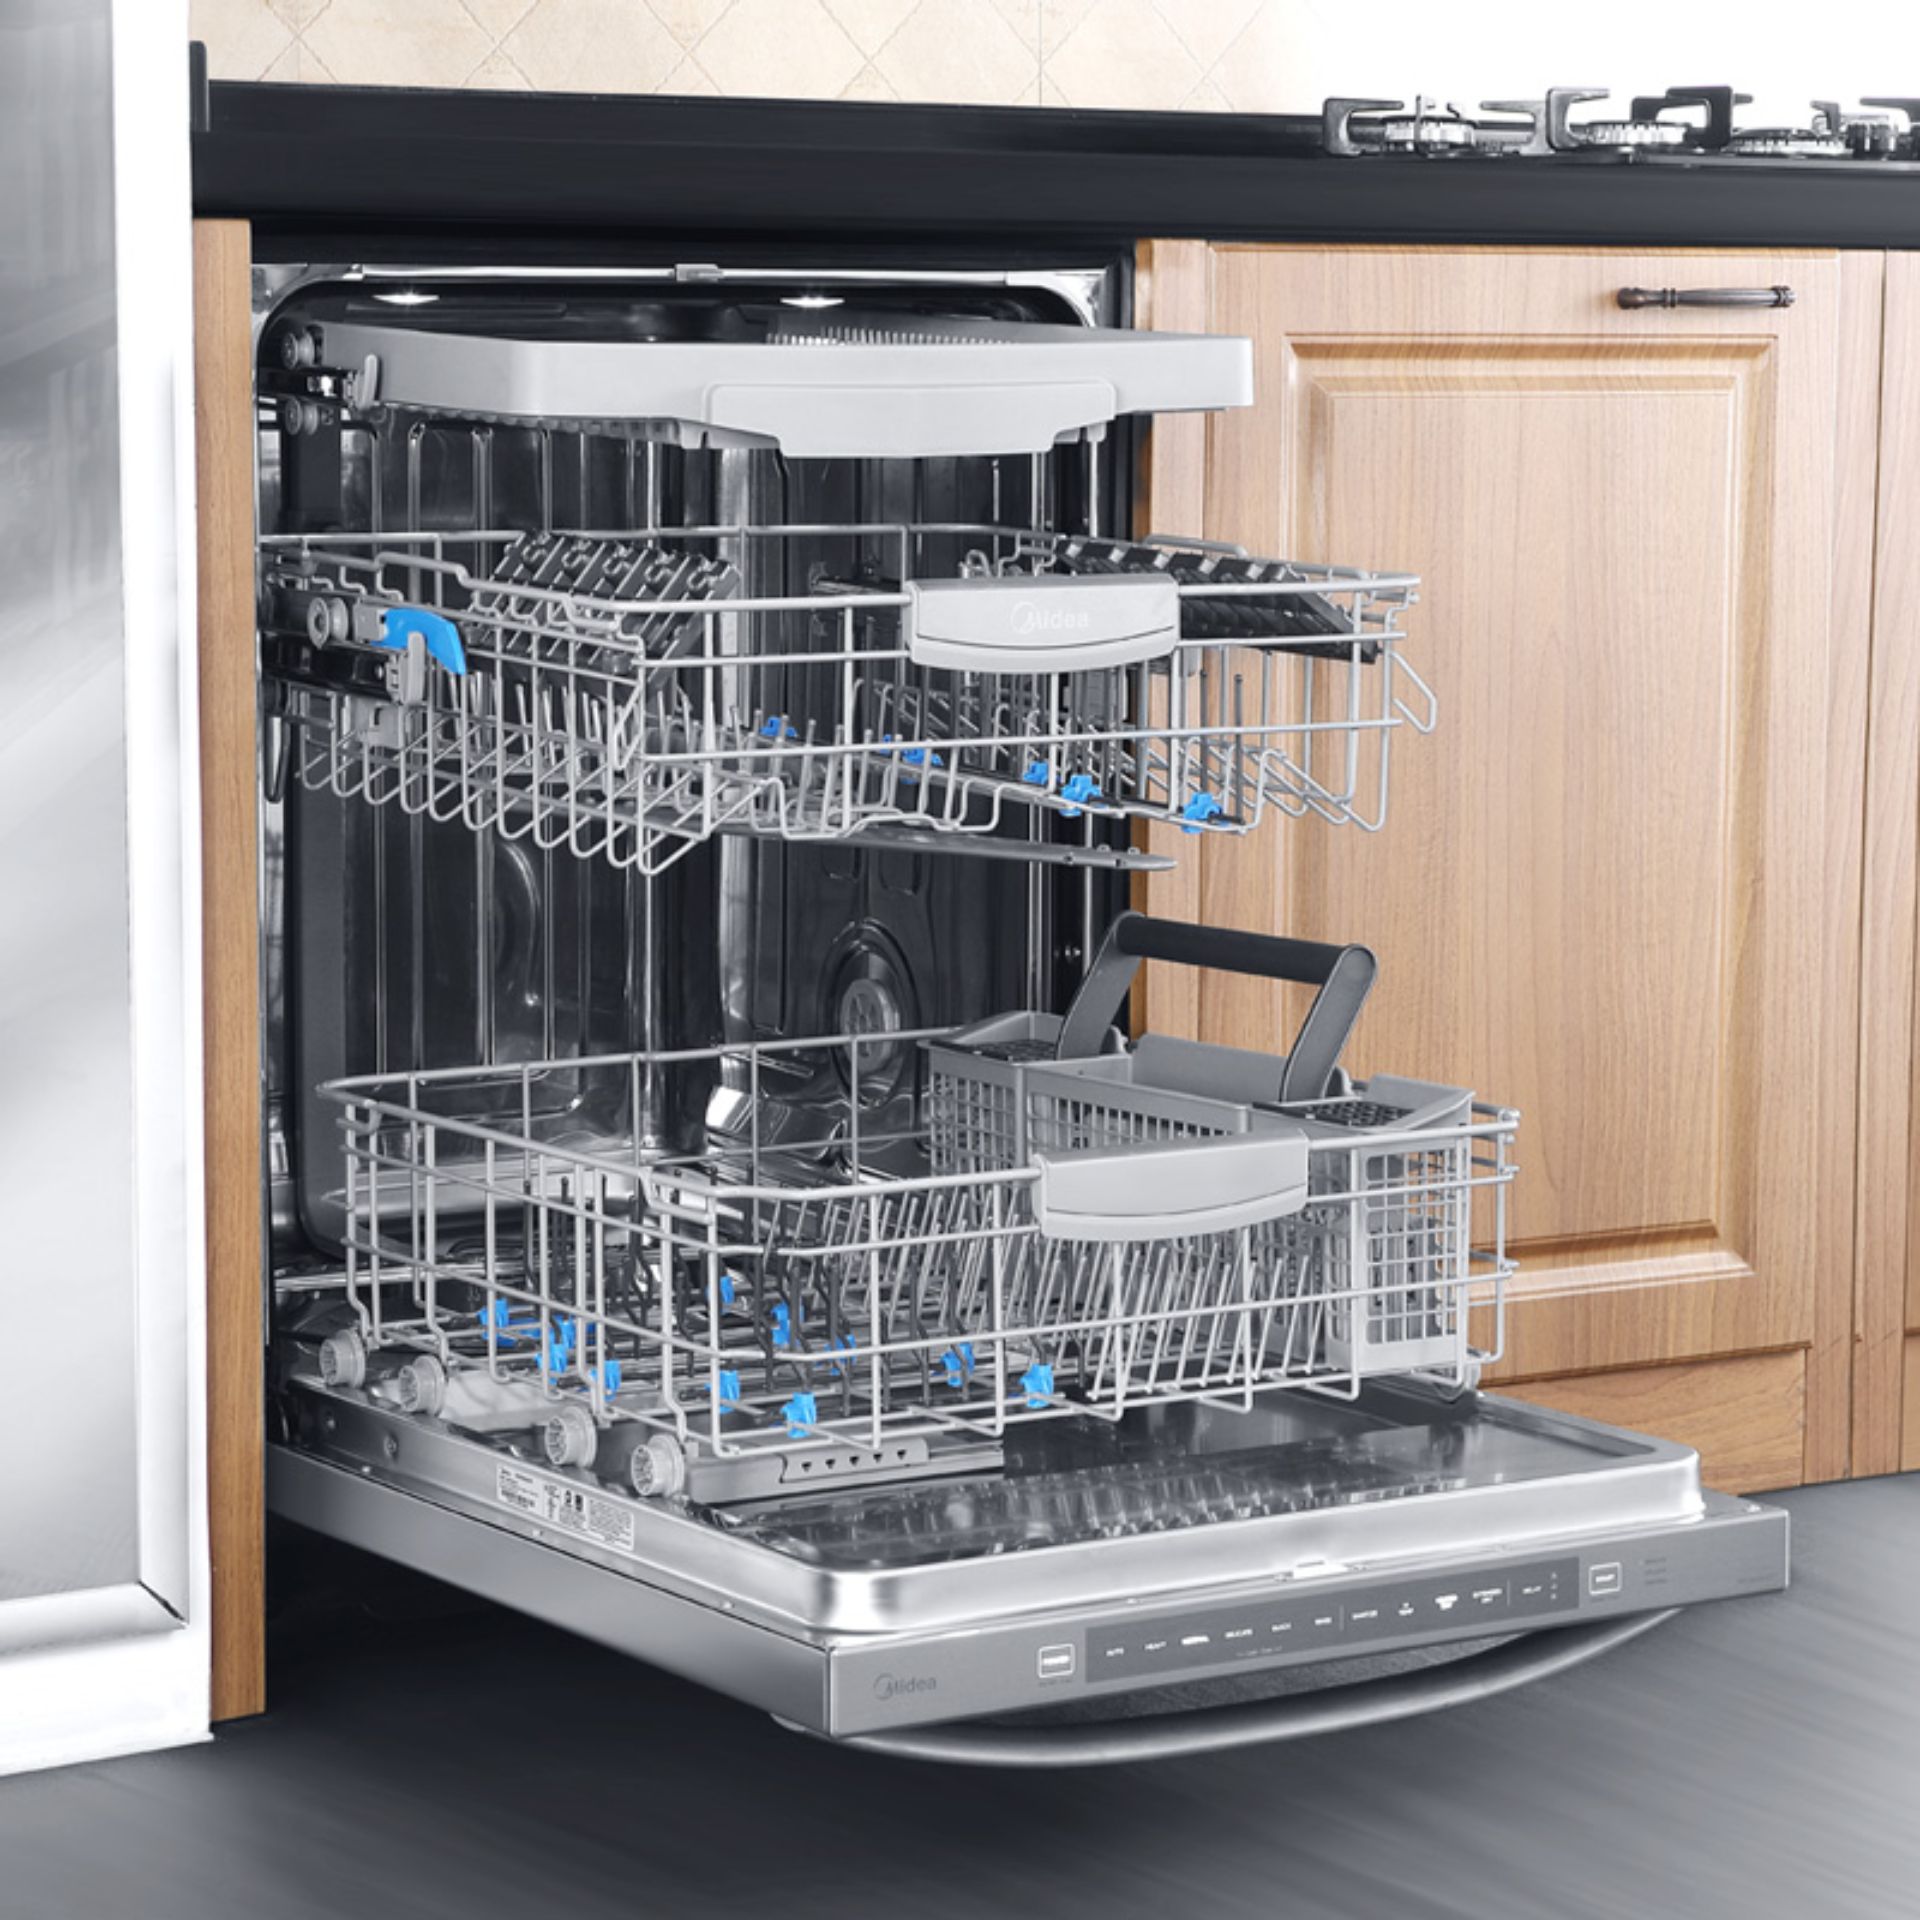 Midea Dishwasher in new Appliance Suite